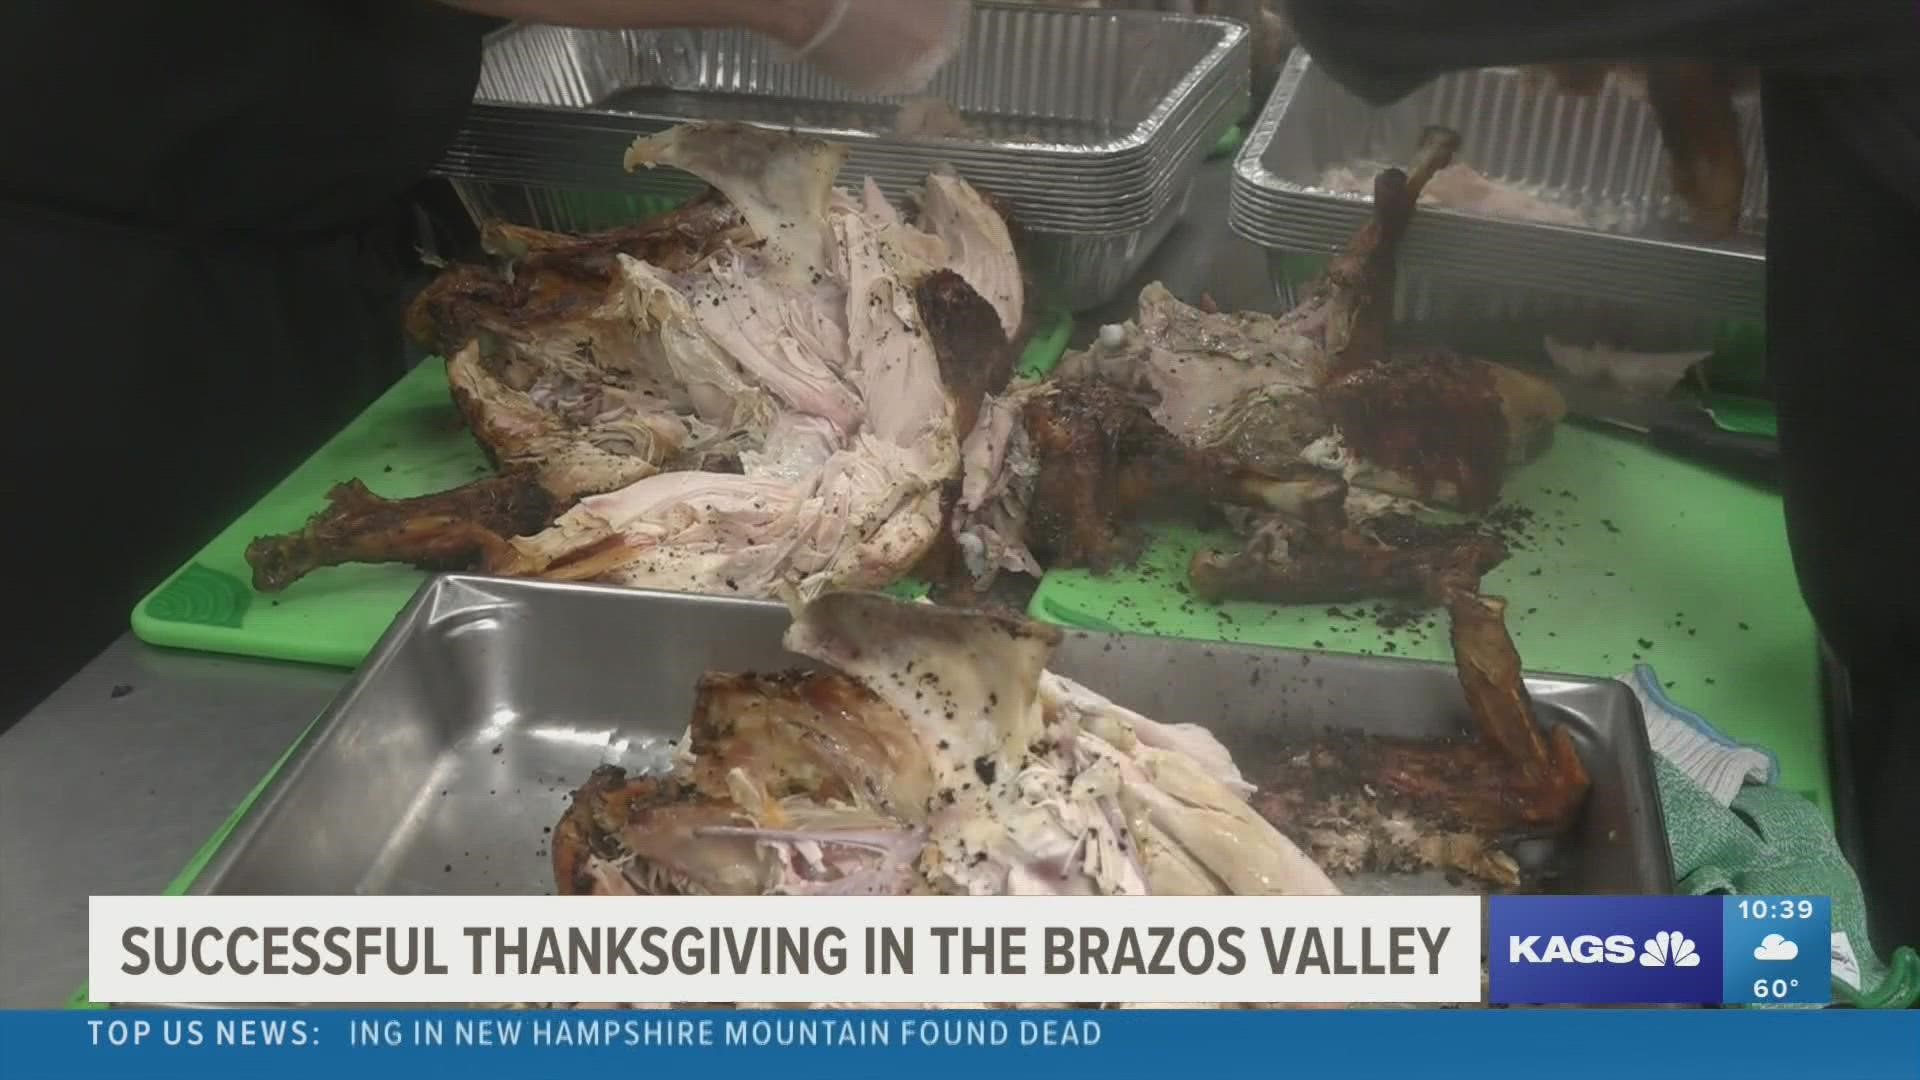 After days of preparation by various organizations, "Thanksgiving in the Brazos Valley" kicked off without a hitch, feeding thousands locally in need of a meal.